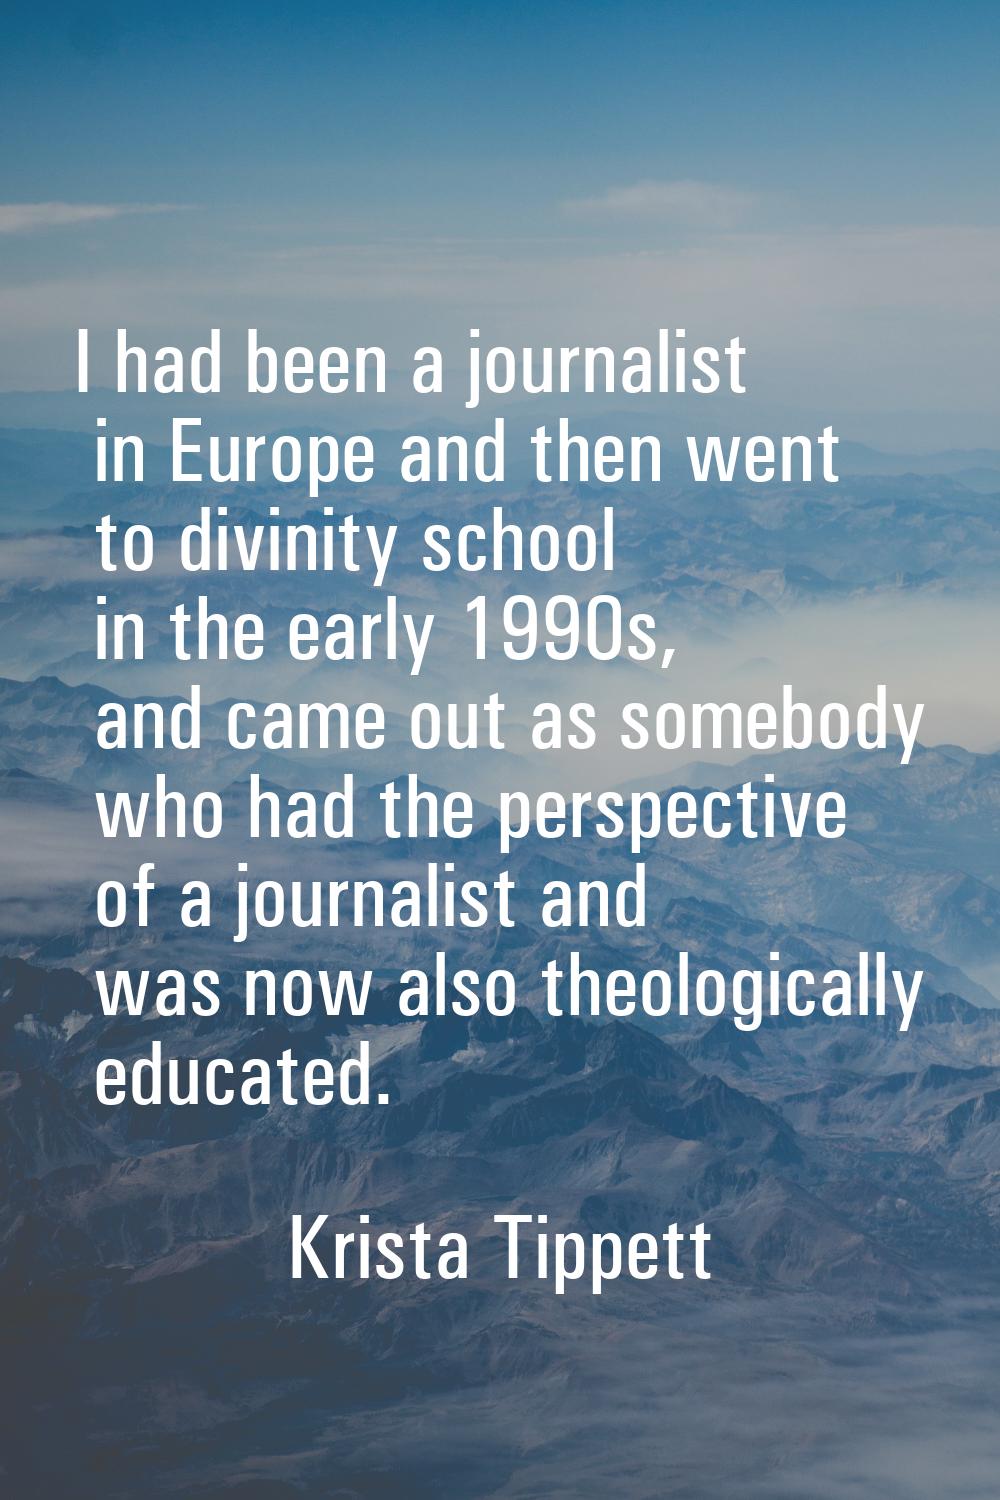 I had been a journalist in Europe and then went to divinity school in the early 1990s, and came out